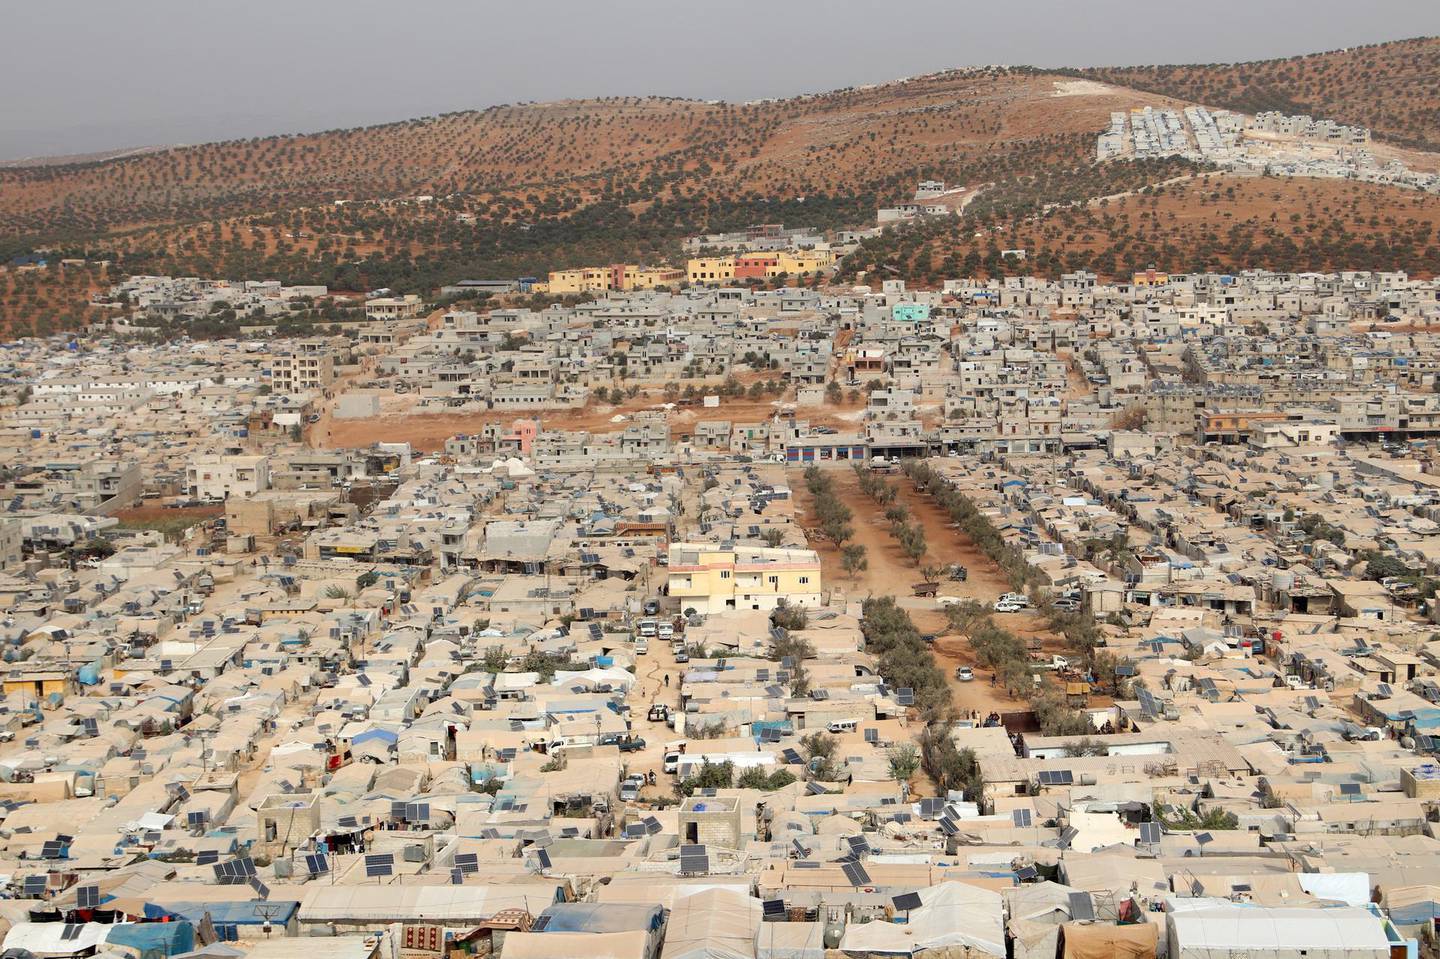 This picture shows a general view of an overcrowded displacement camp near the village of Qah near the Turkish border in Syria's northwestern Idlib province, on October 28, 2020, during the novel coronavirus pandemic crisis. - Humanitarian workers fear any further rise in novel coronavirus cases would be disastrous in northwest Syria, where almost 1.5 million people live in overcrowded camps or shelters, after escaping the fighting during Syria's nine-year civil war, often with poor access to running water. (Photo by Ahmad al-ATRASH / AFP)